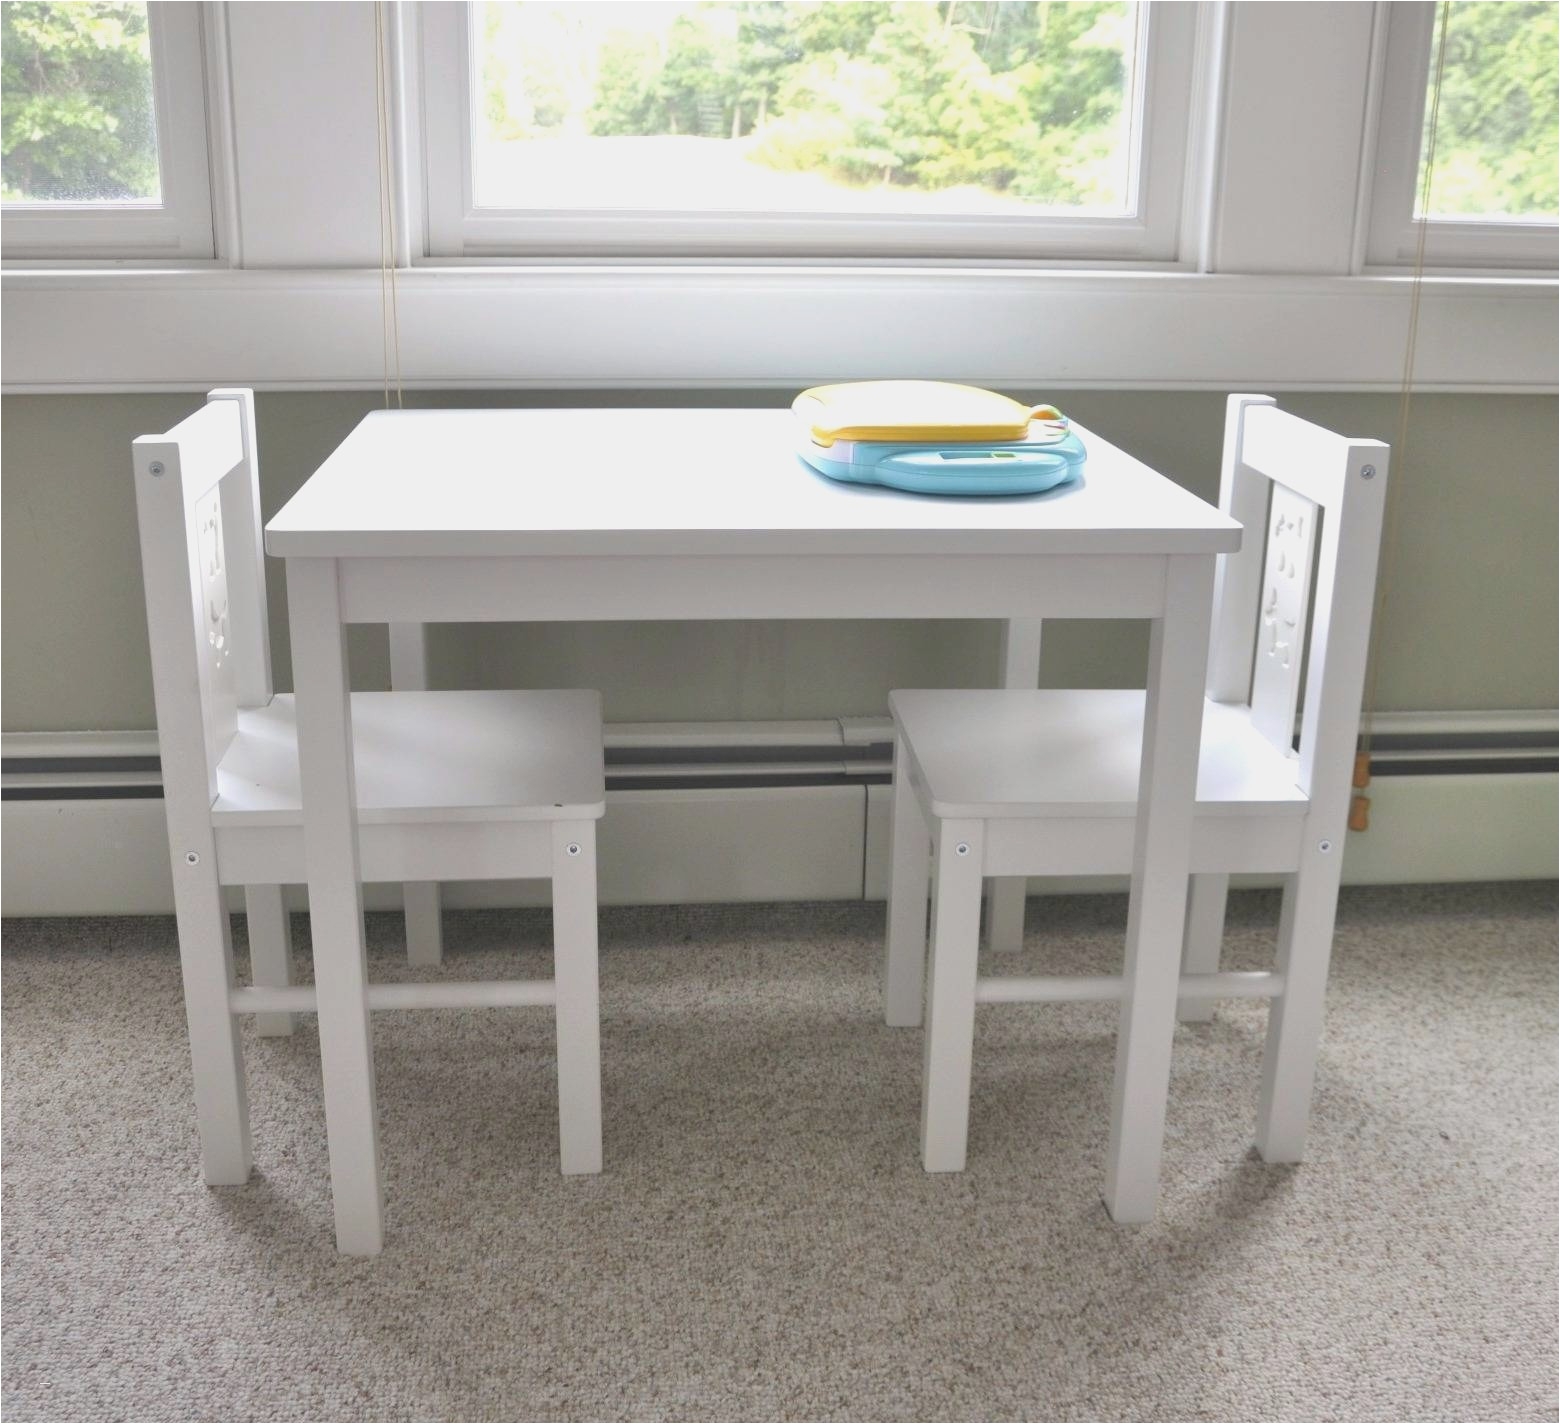 Ikea Small Table and Chairs for toddlers Kids Table Set Luxury Elegant Kids Table and Chair Set Ikea